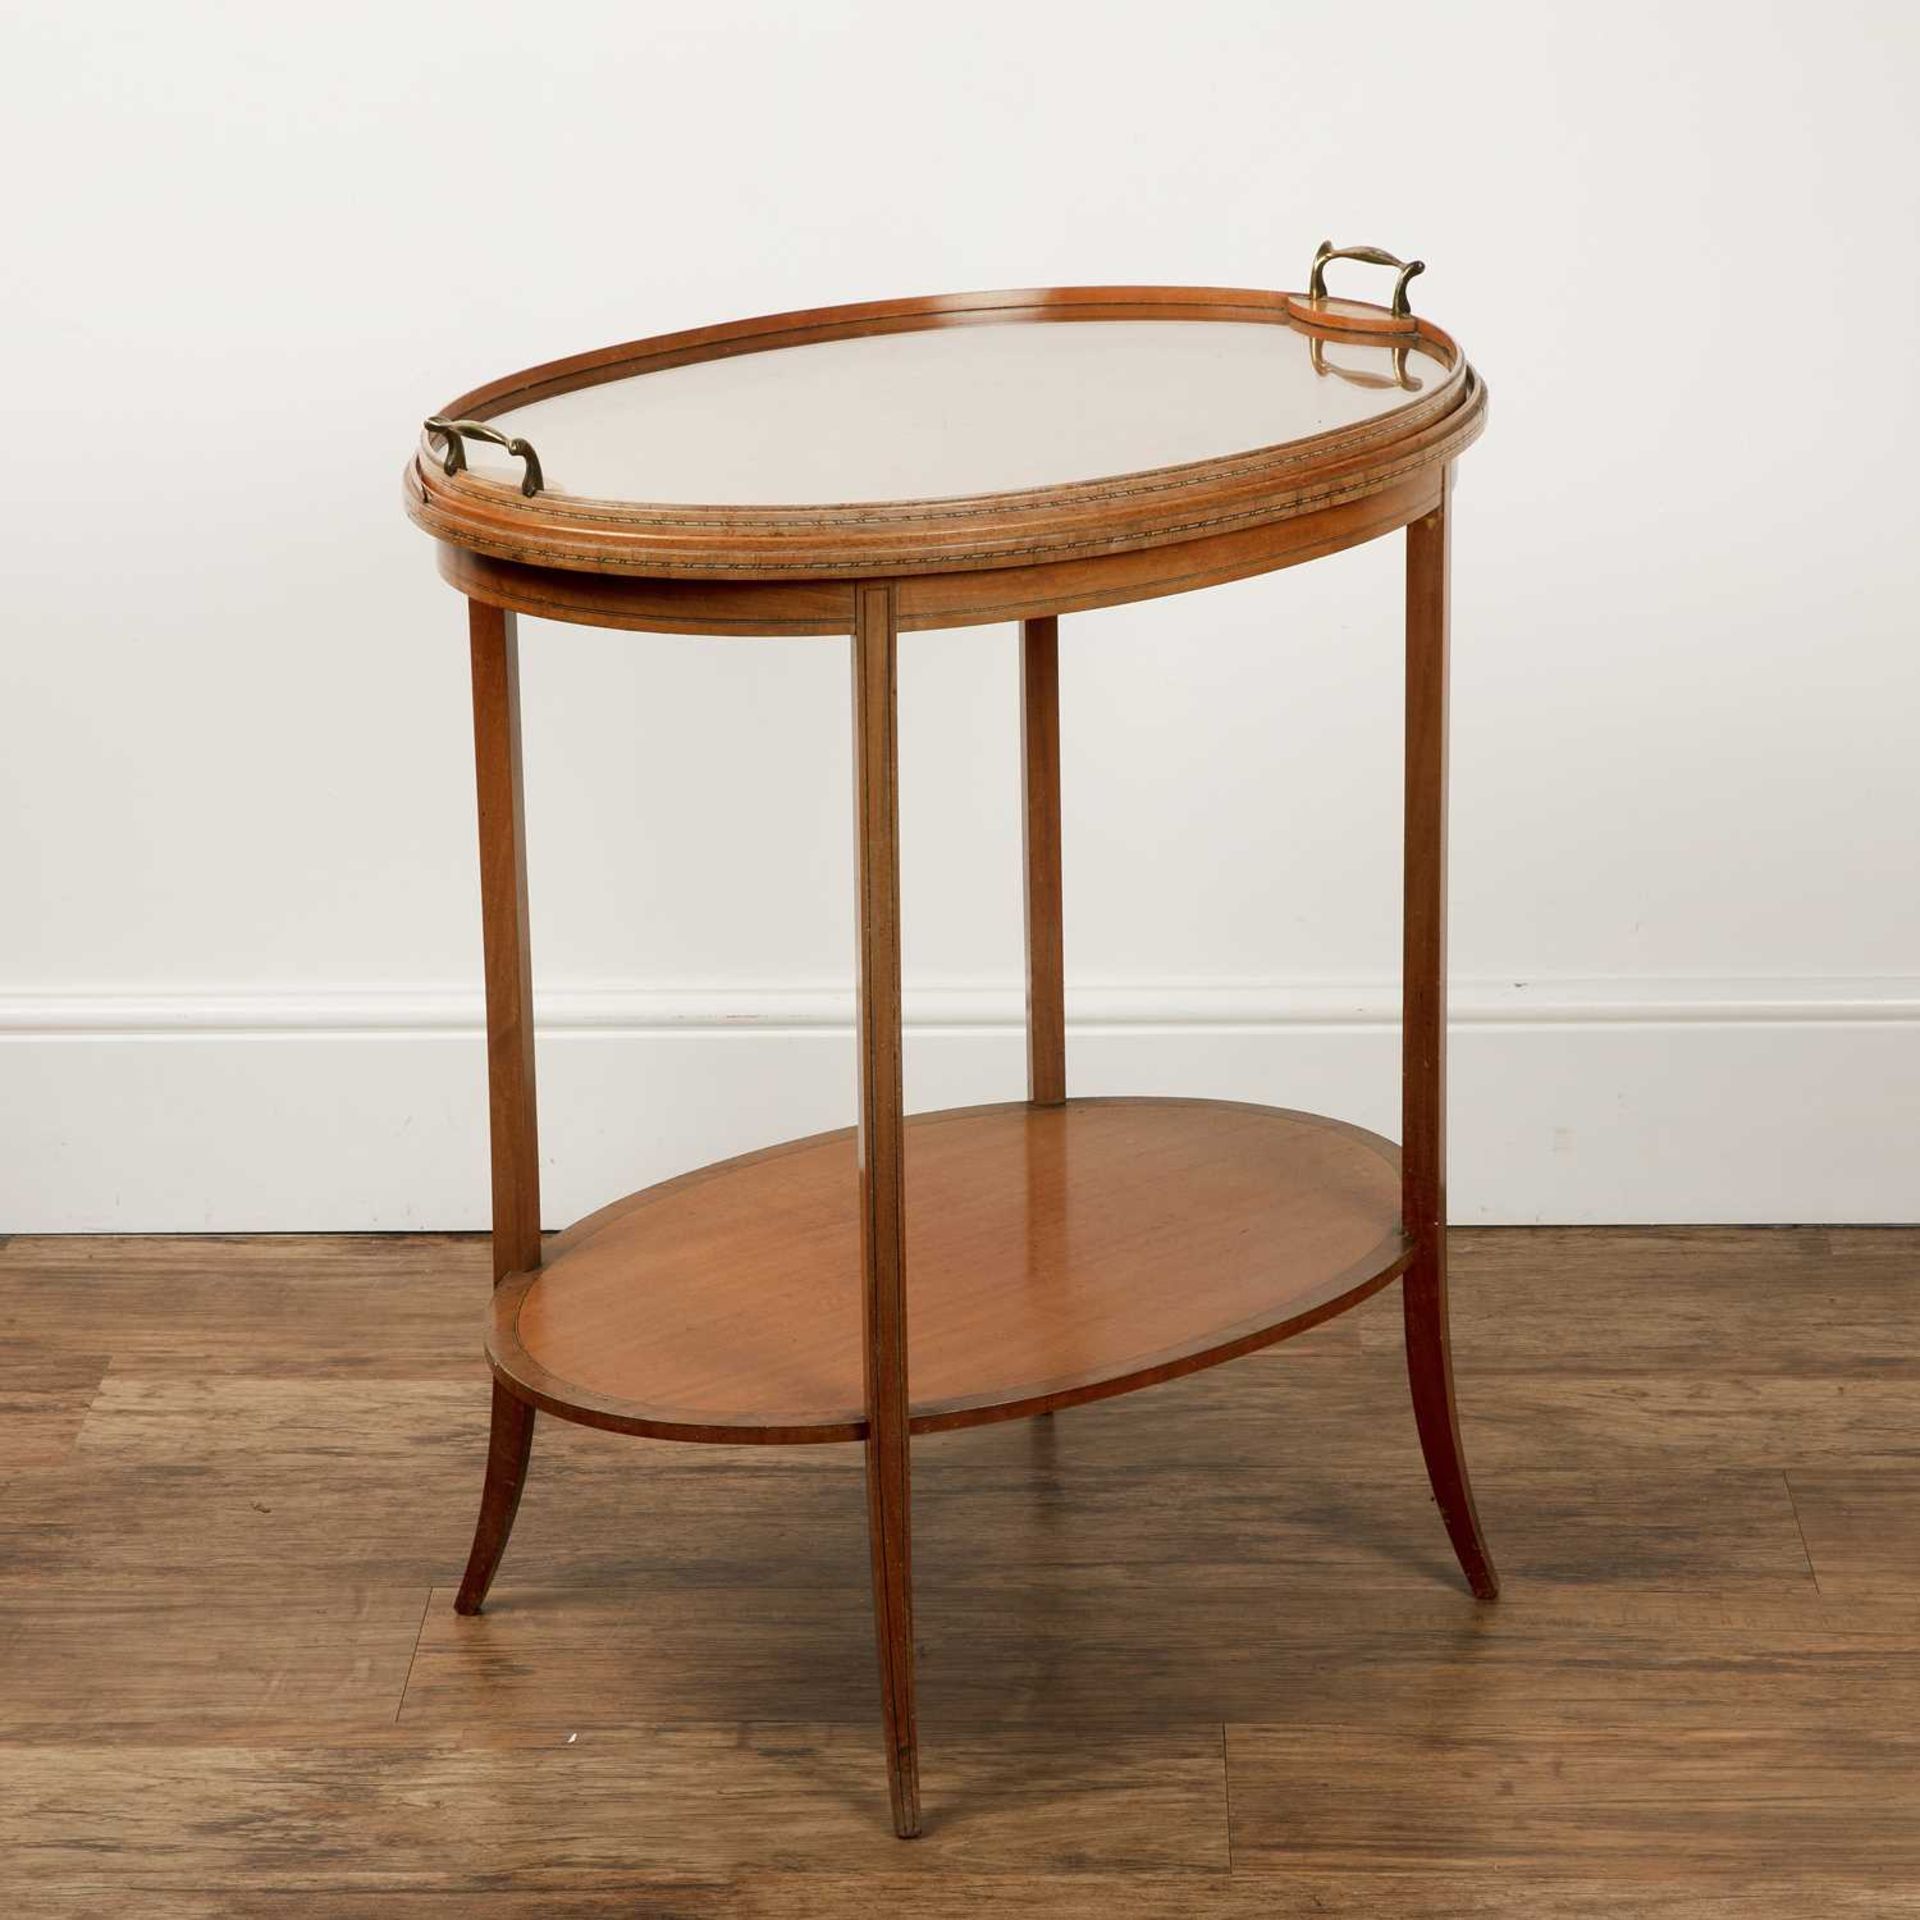 Oval two tier table satinwood with a tray top, 66cm long x 46cm wide x 72cm highIn generally good